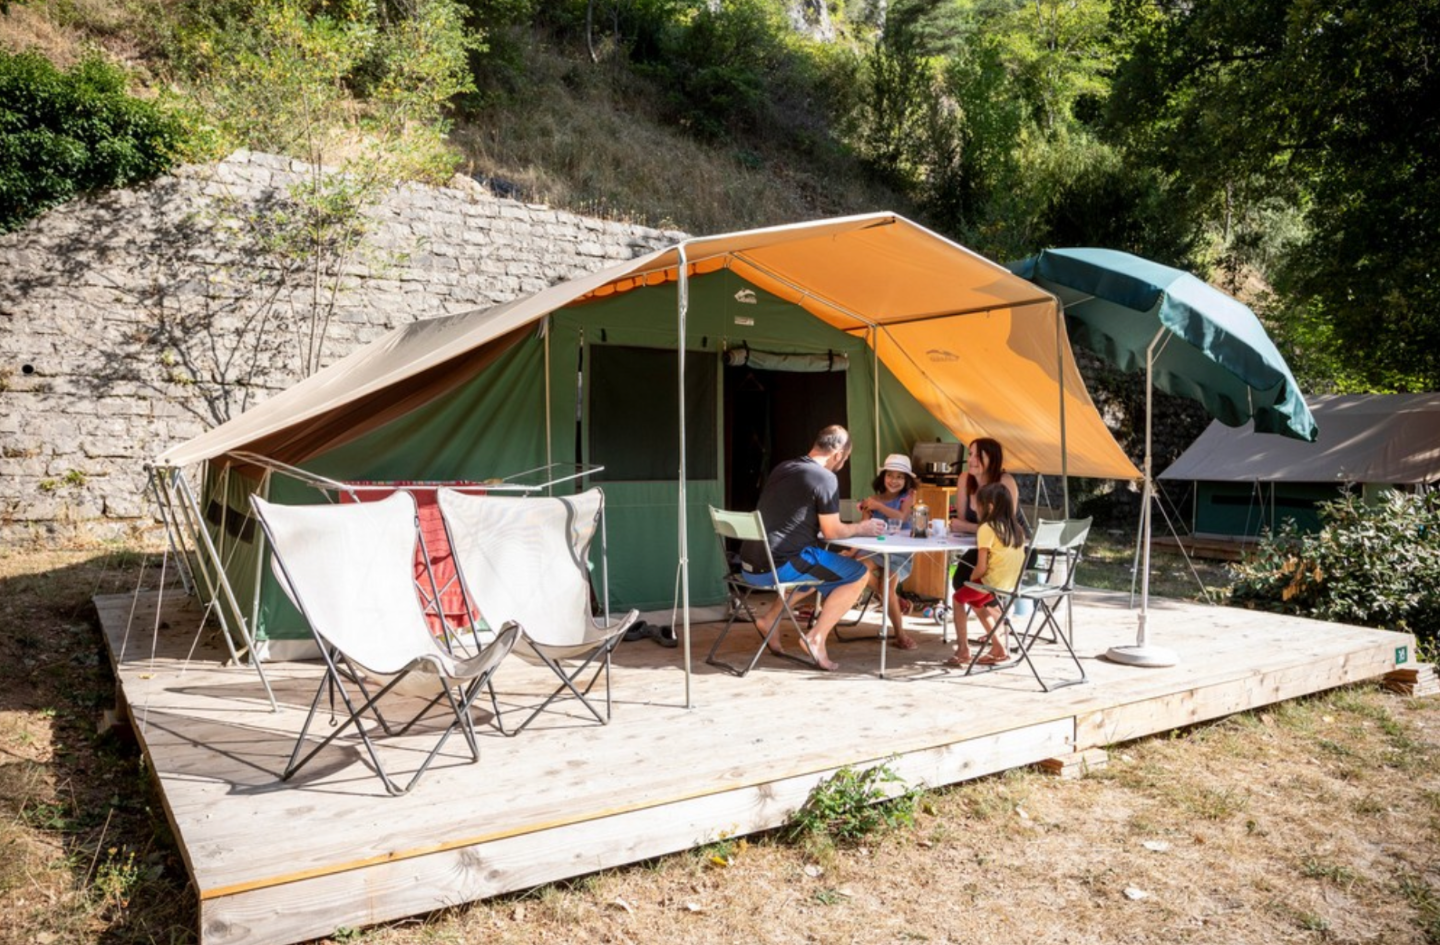 Hôte GreenGo: Camping Huttopia Gorges du Tarn - Image 2